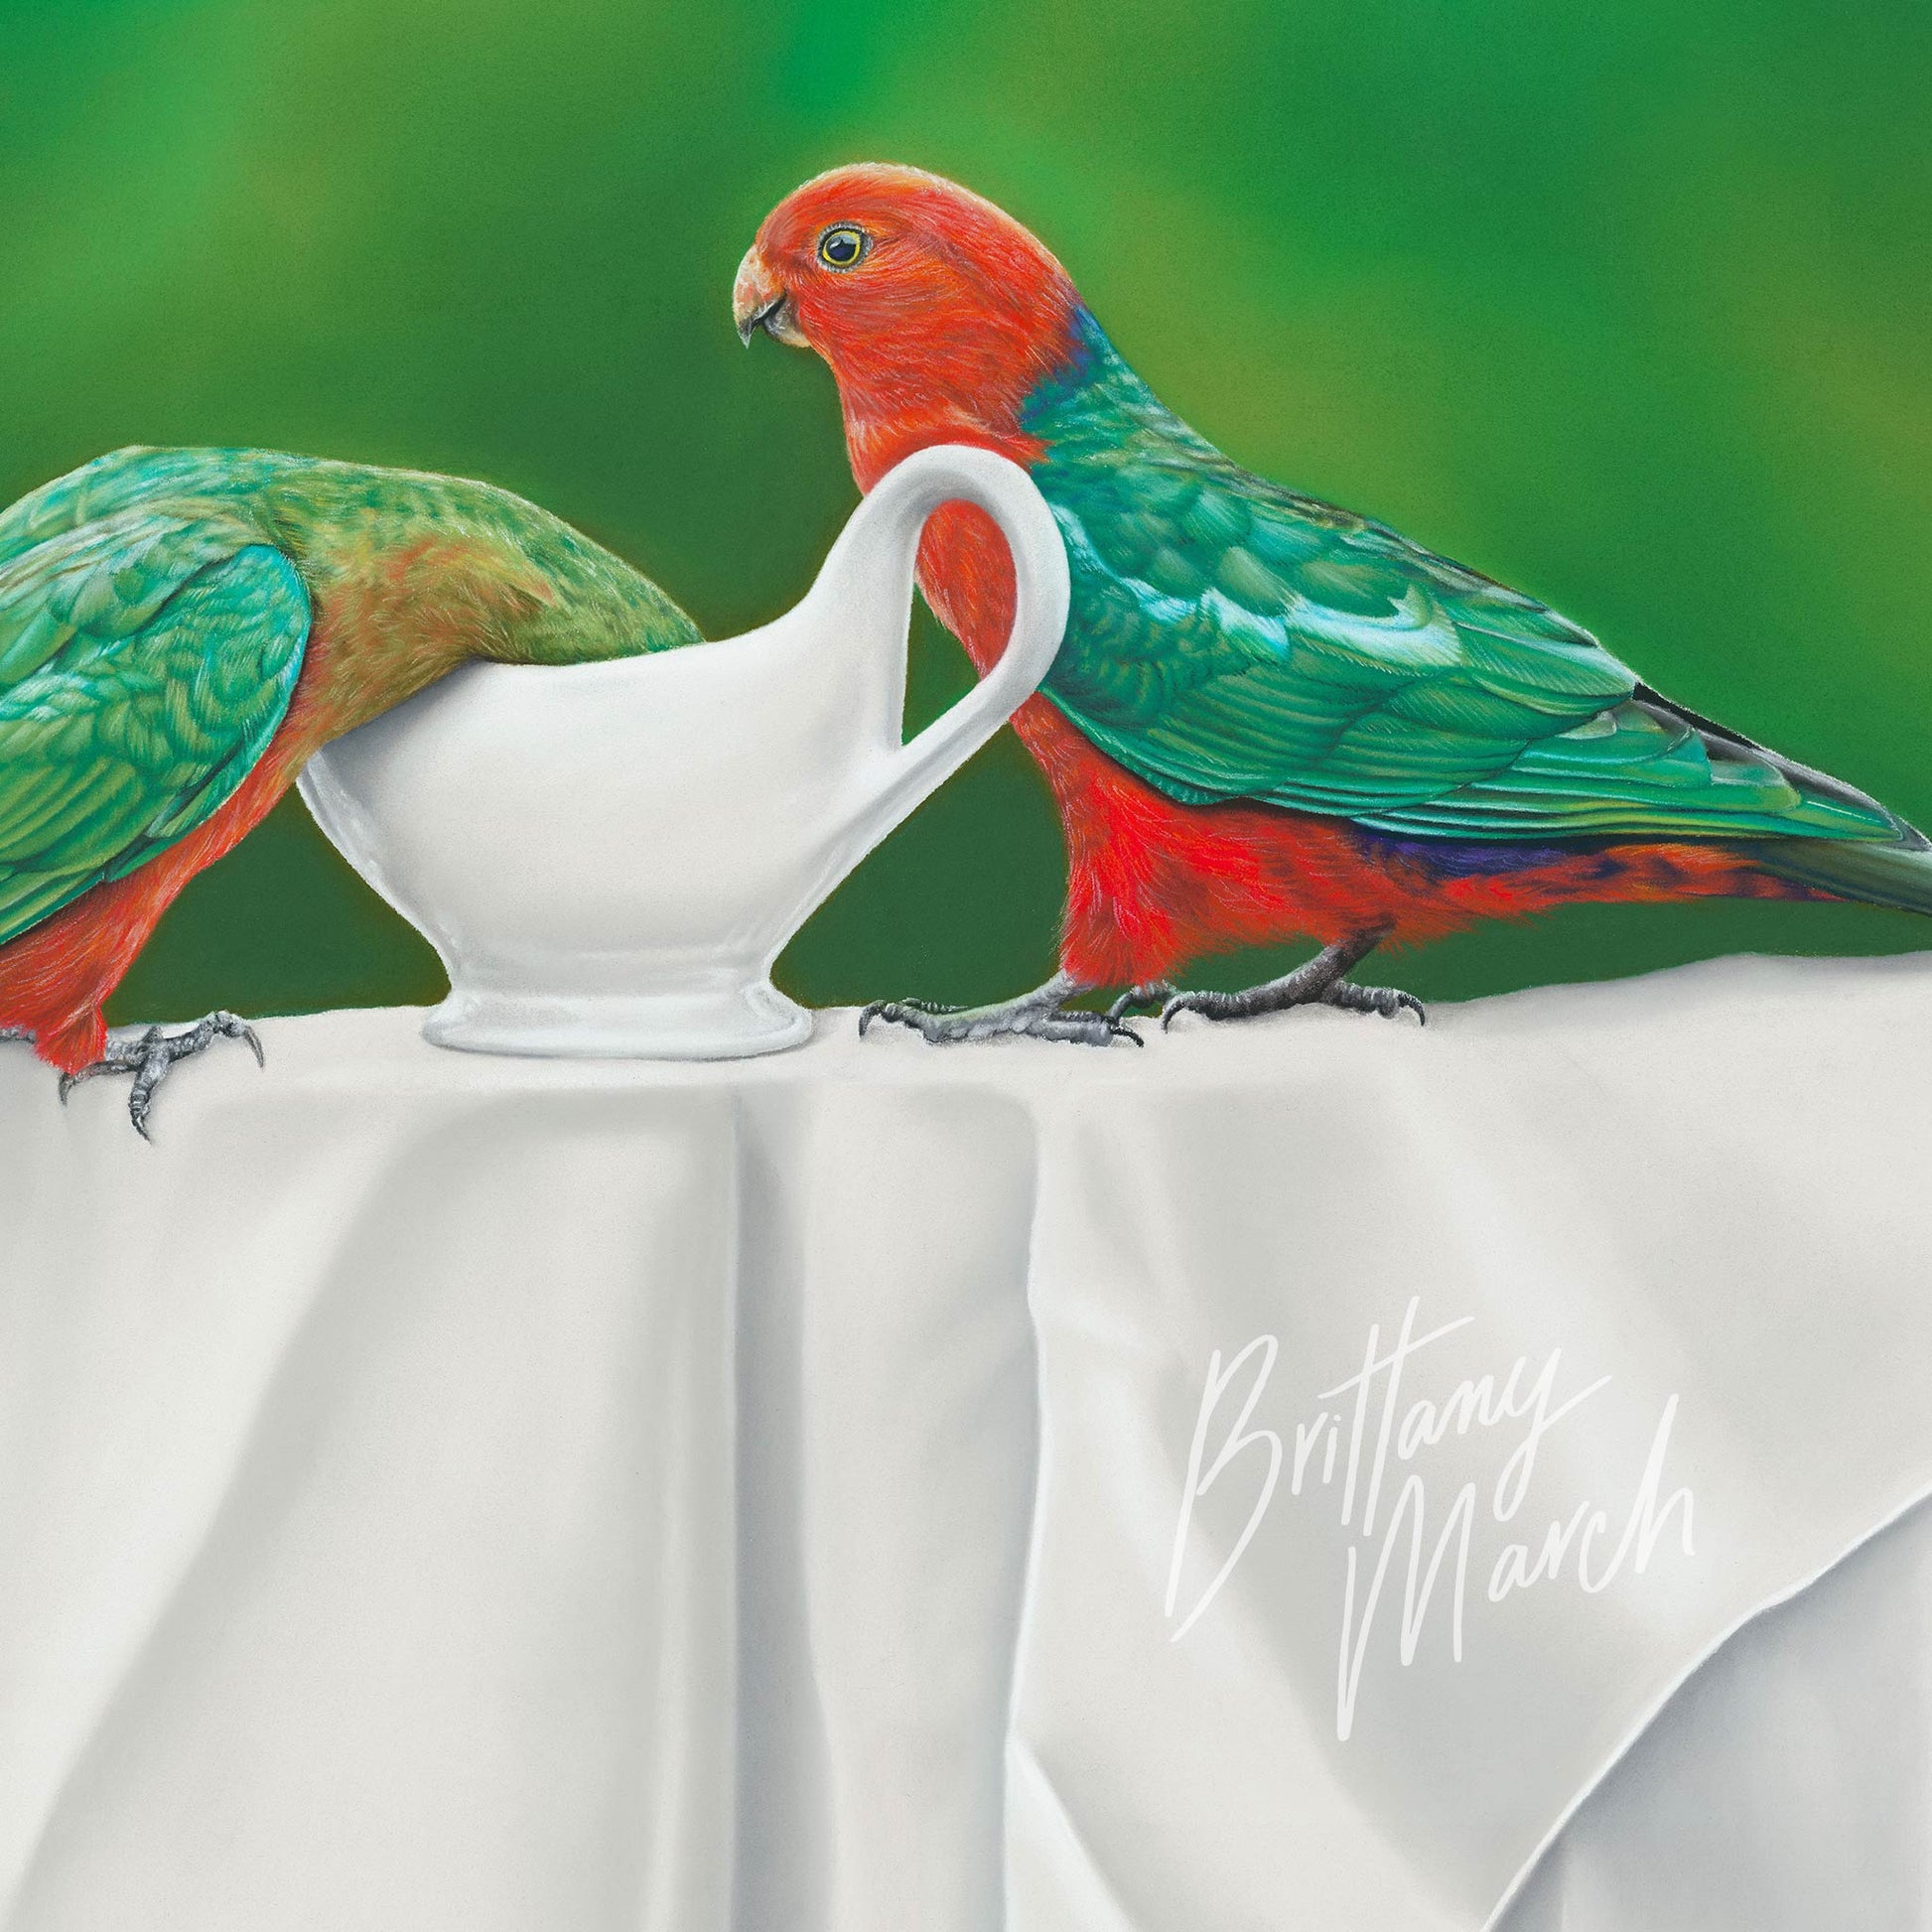 artwork of two king parrot birds in a still life composition